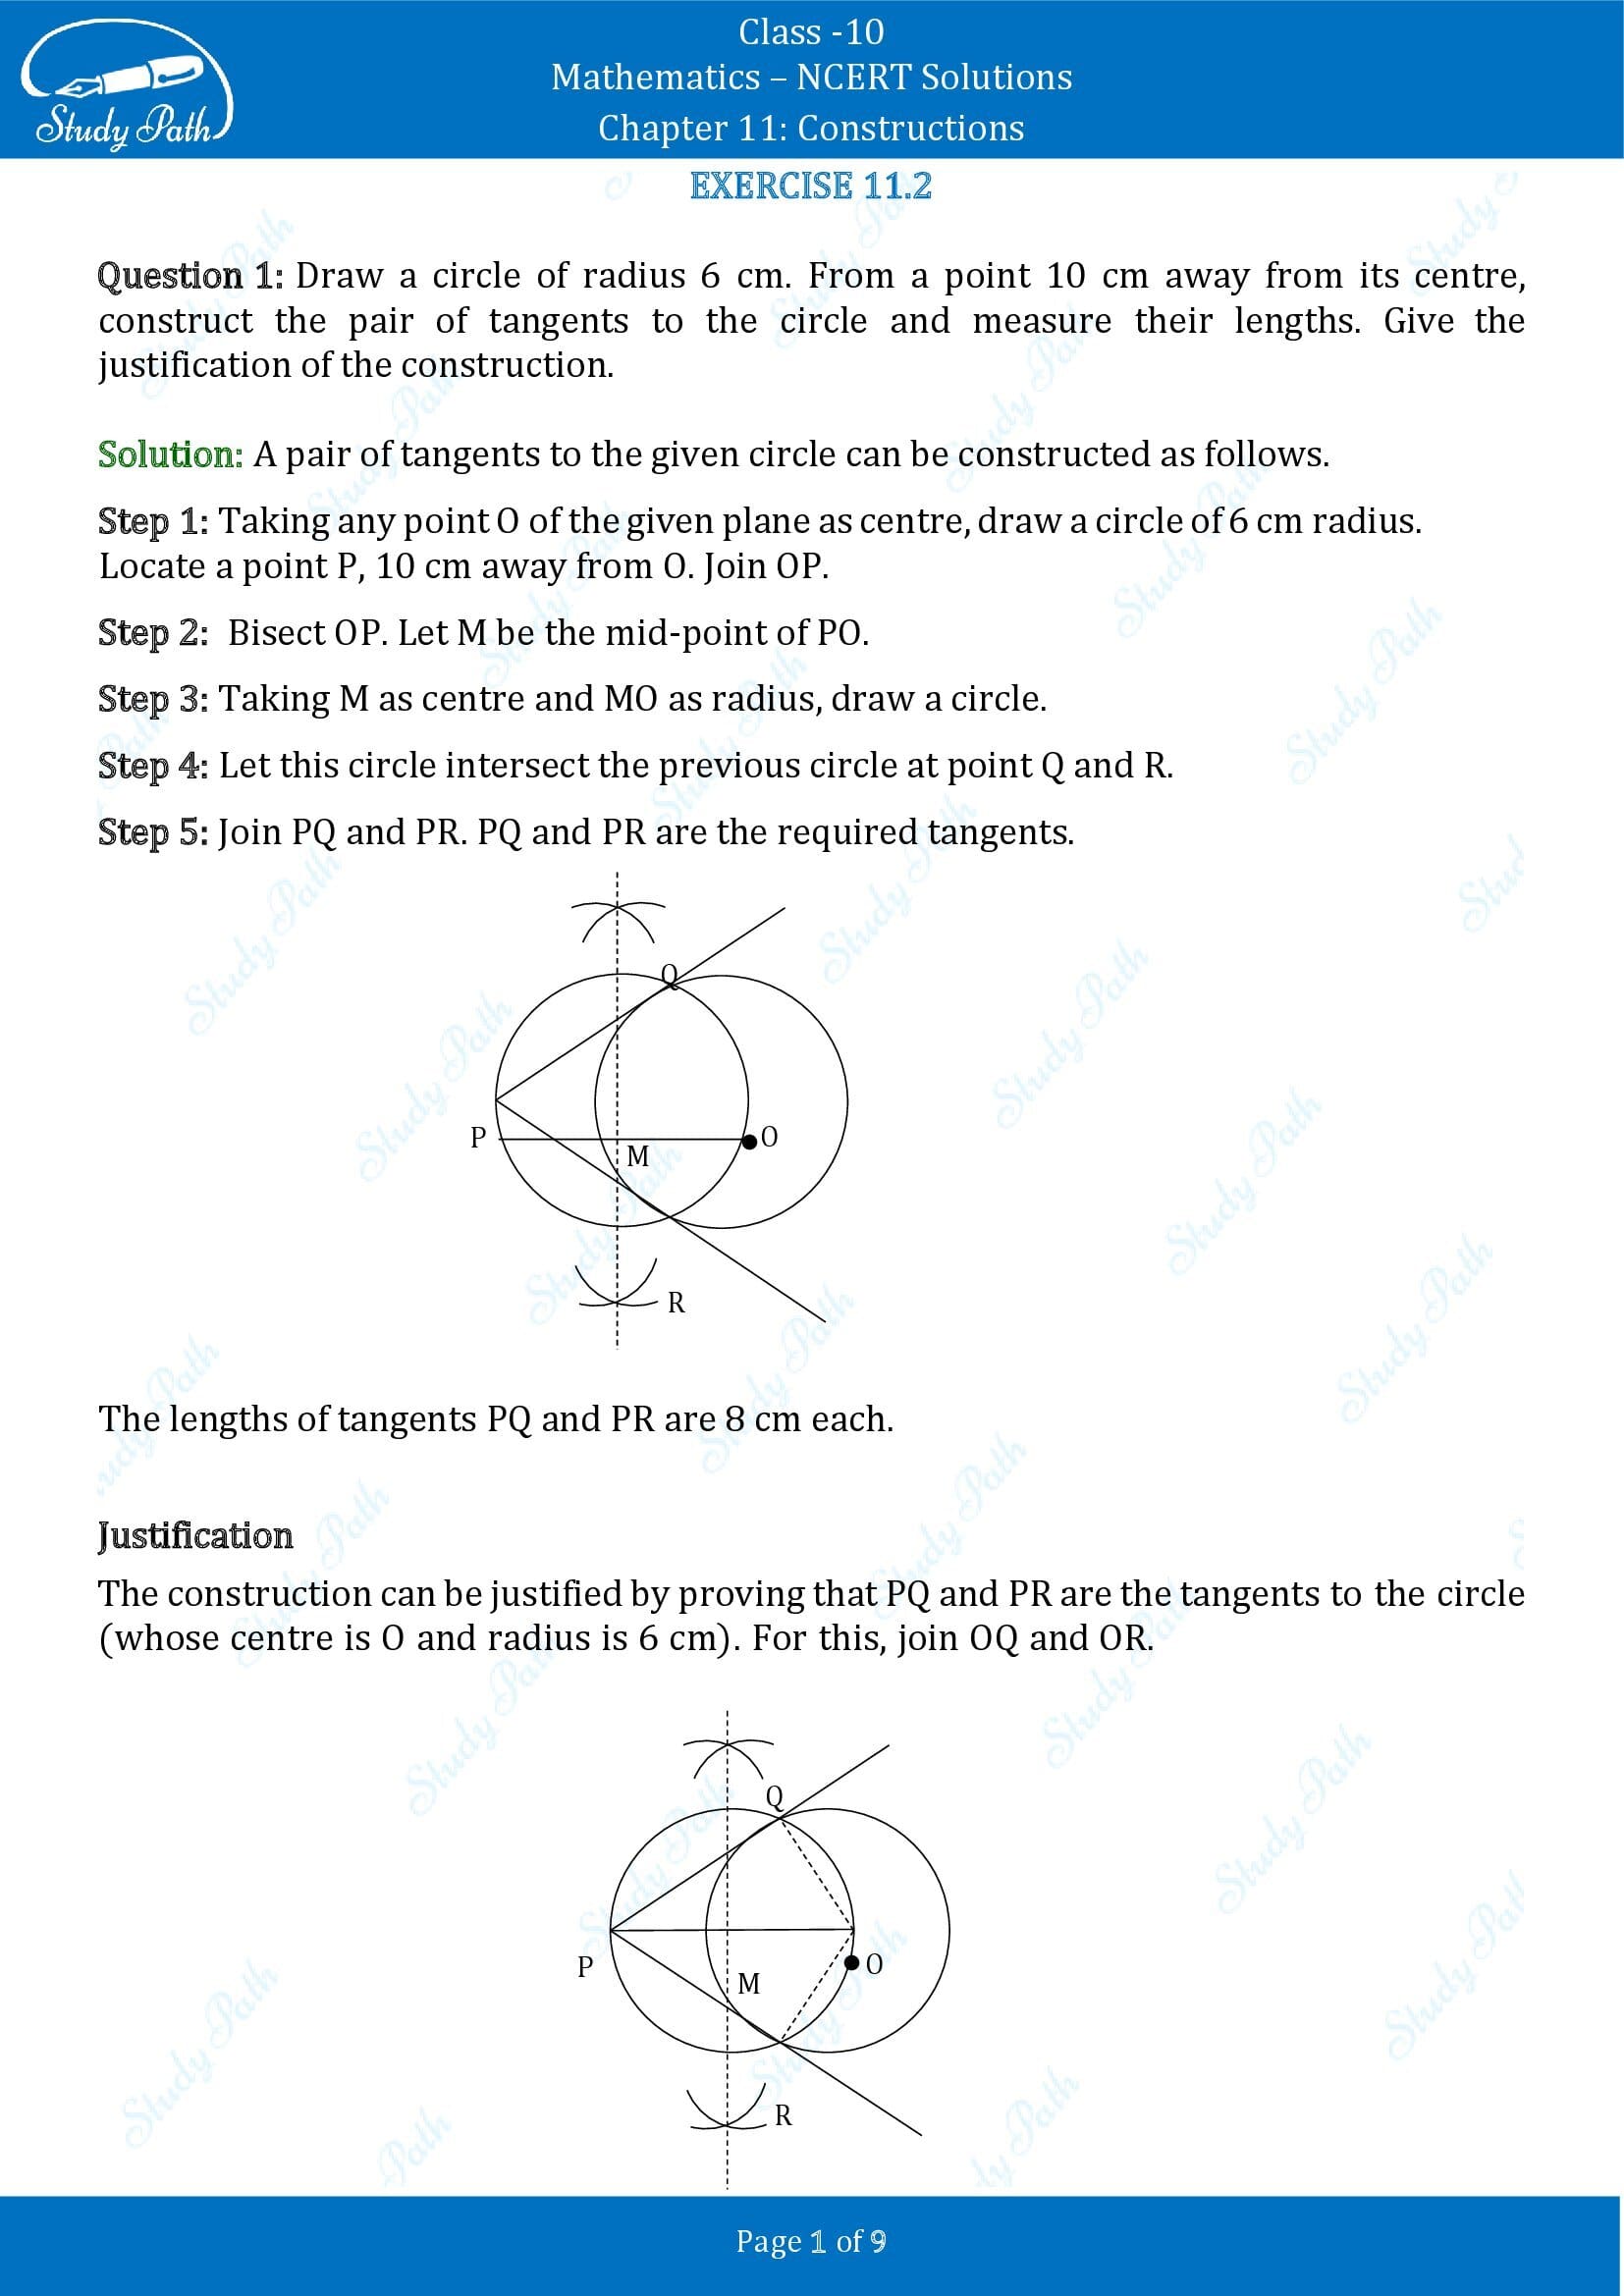 NCERT Solutions for Class 10 Maths Chapter 11 Constructions Exercise 11.2 00001